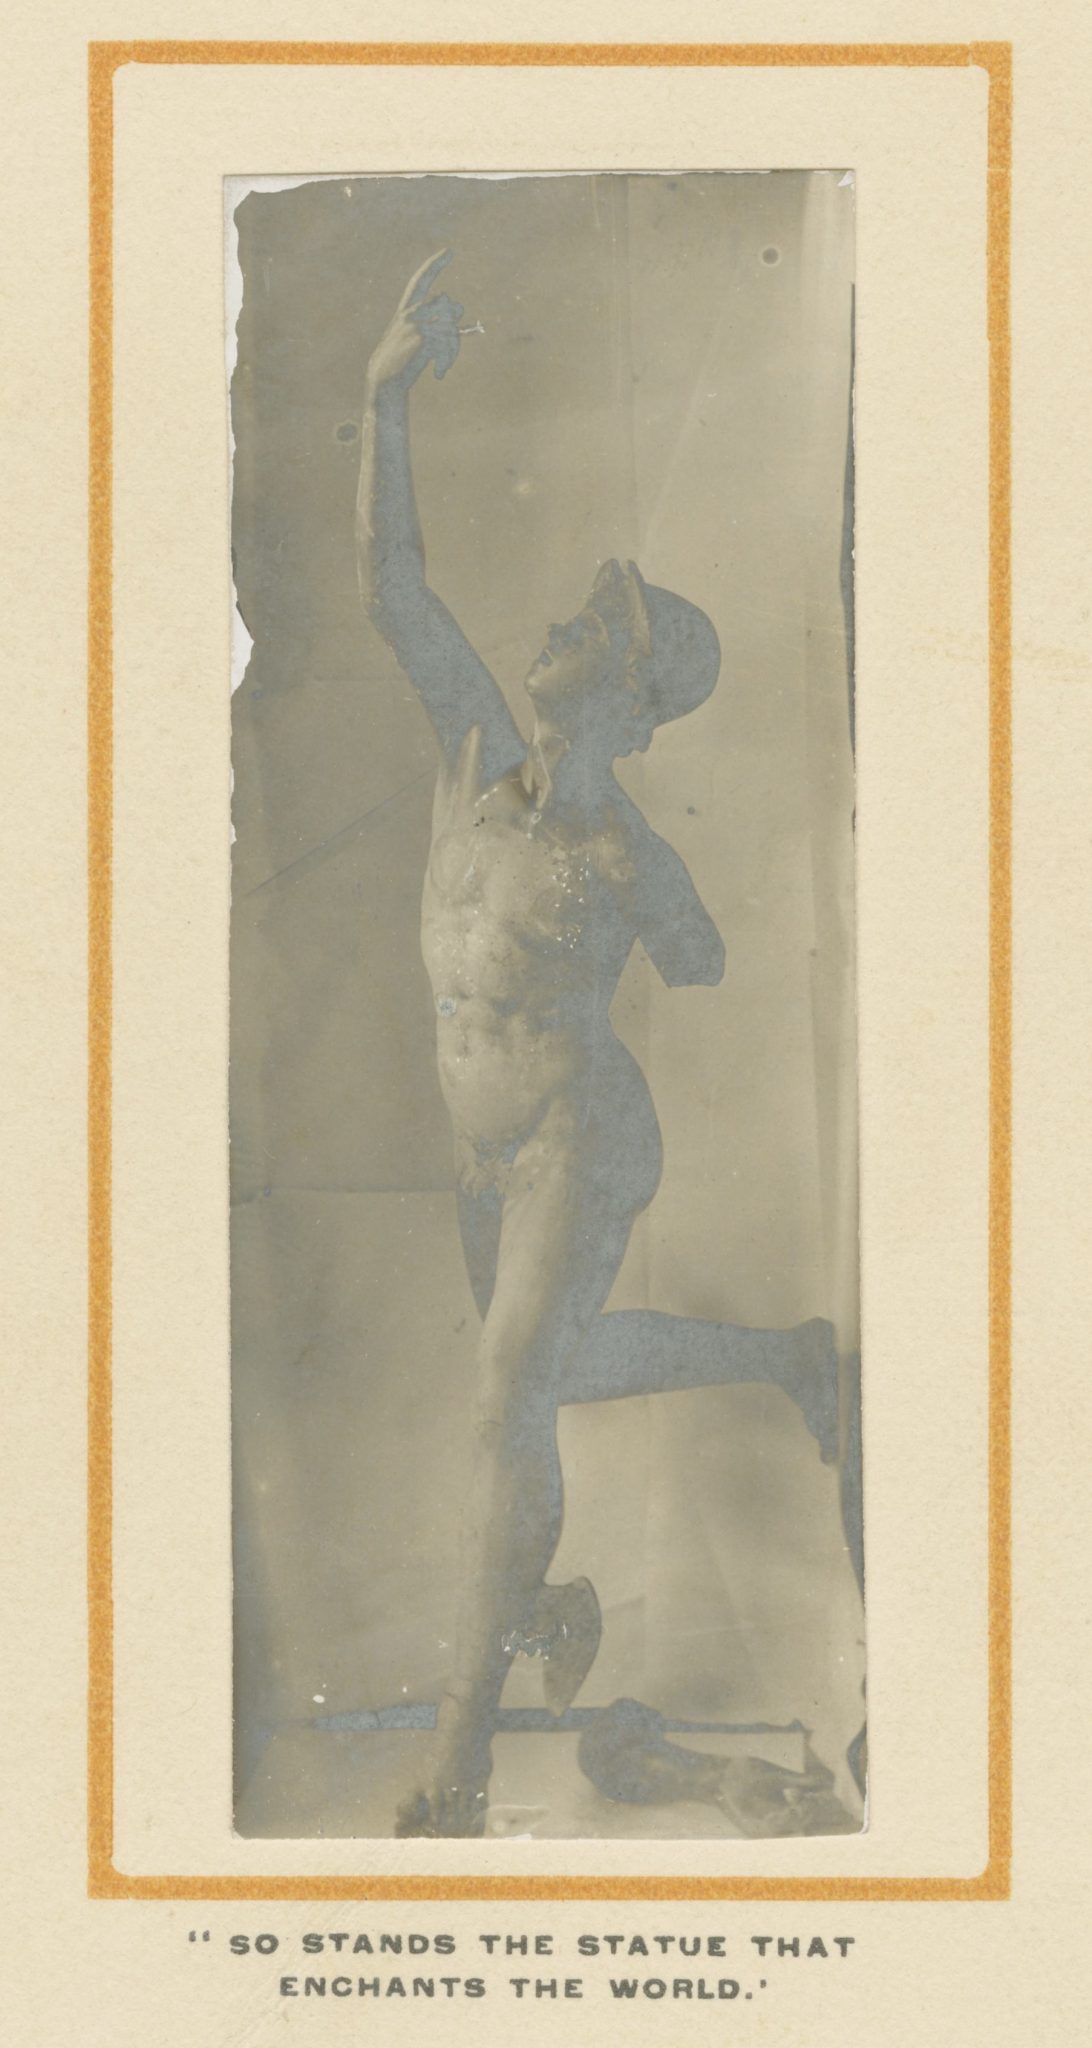 <p>Mercury Picture, from Class of 1905</p><p>First Mercury Banquet Program, 1902.</p><p>Mercury Collection.</p><p>Special Collections and University Archives,</p><p>Colgate University Libraries.</p>